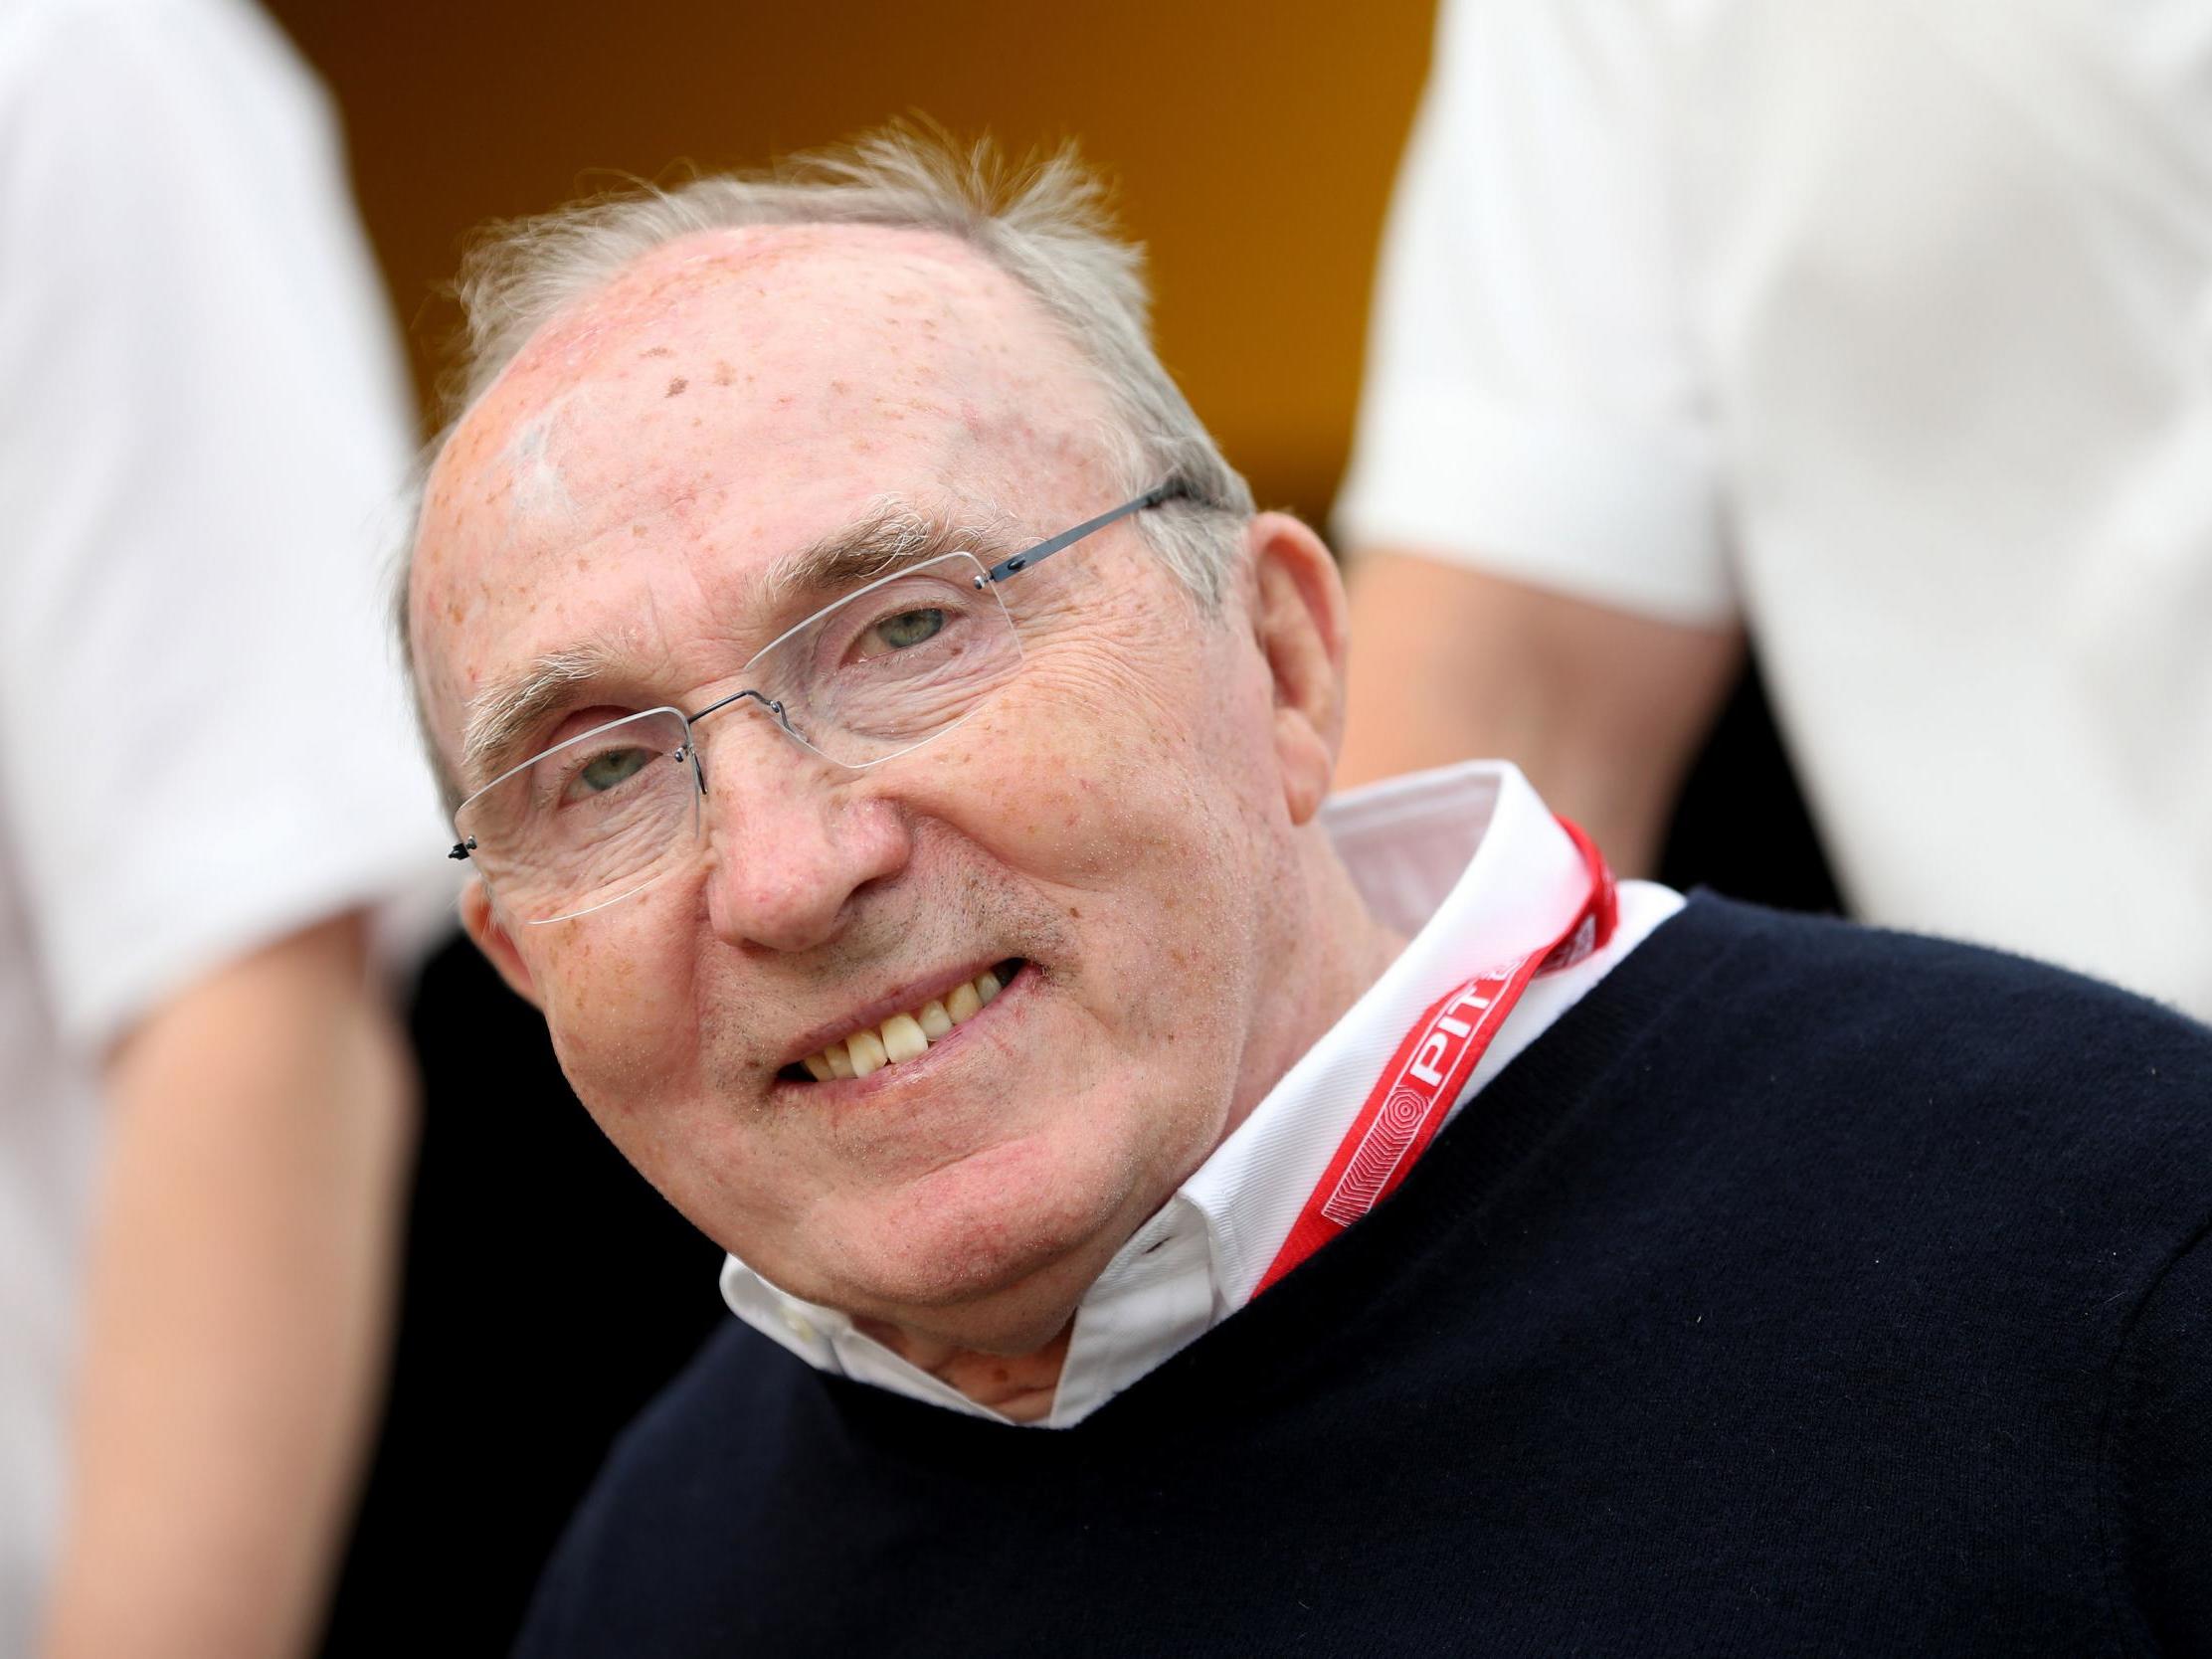 Sir Frank Williams founded the team in 1977